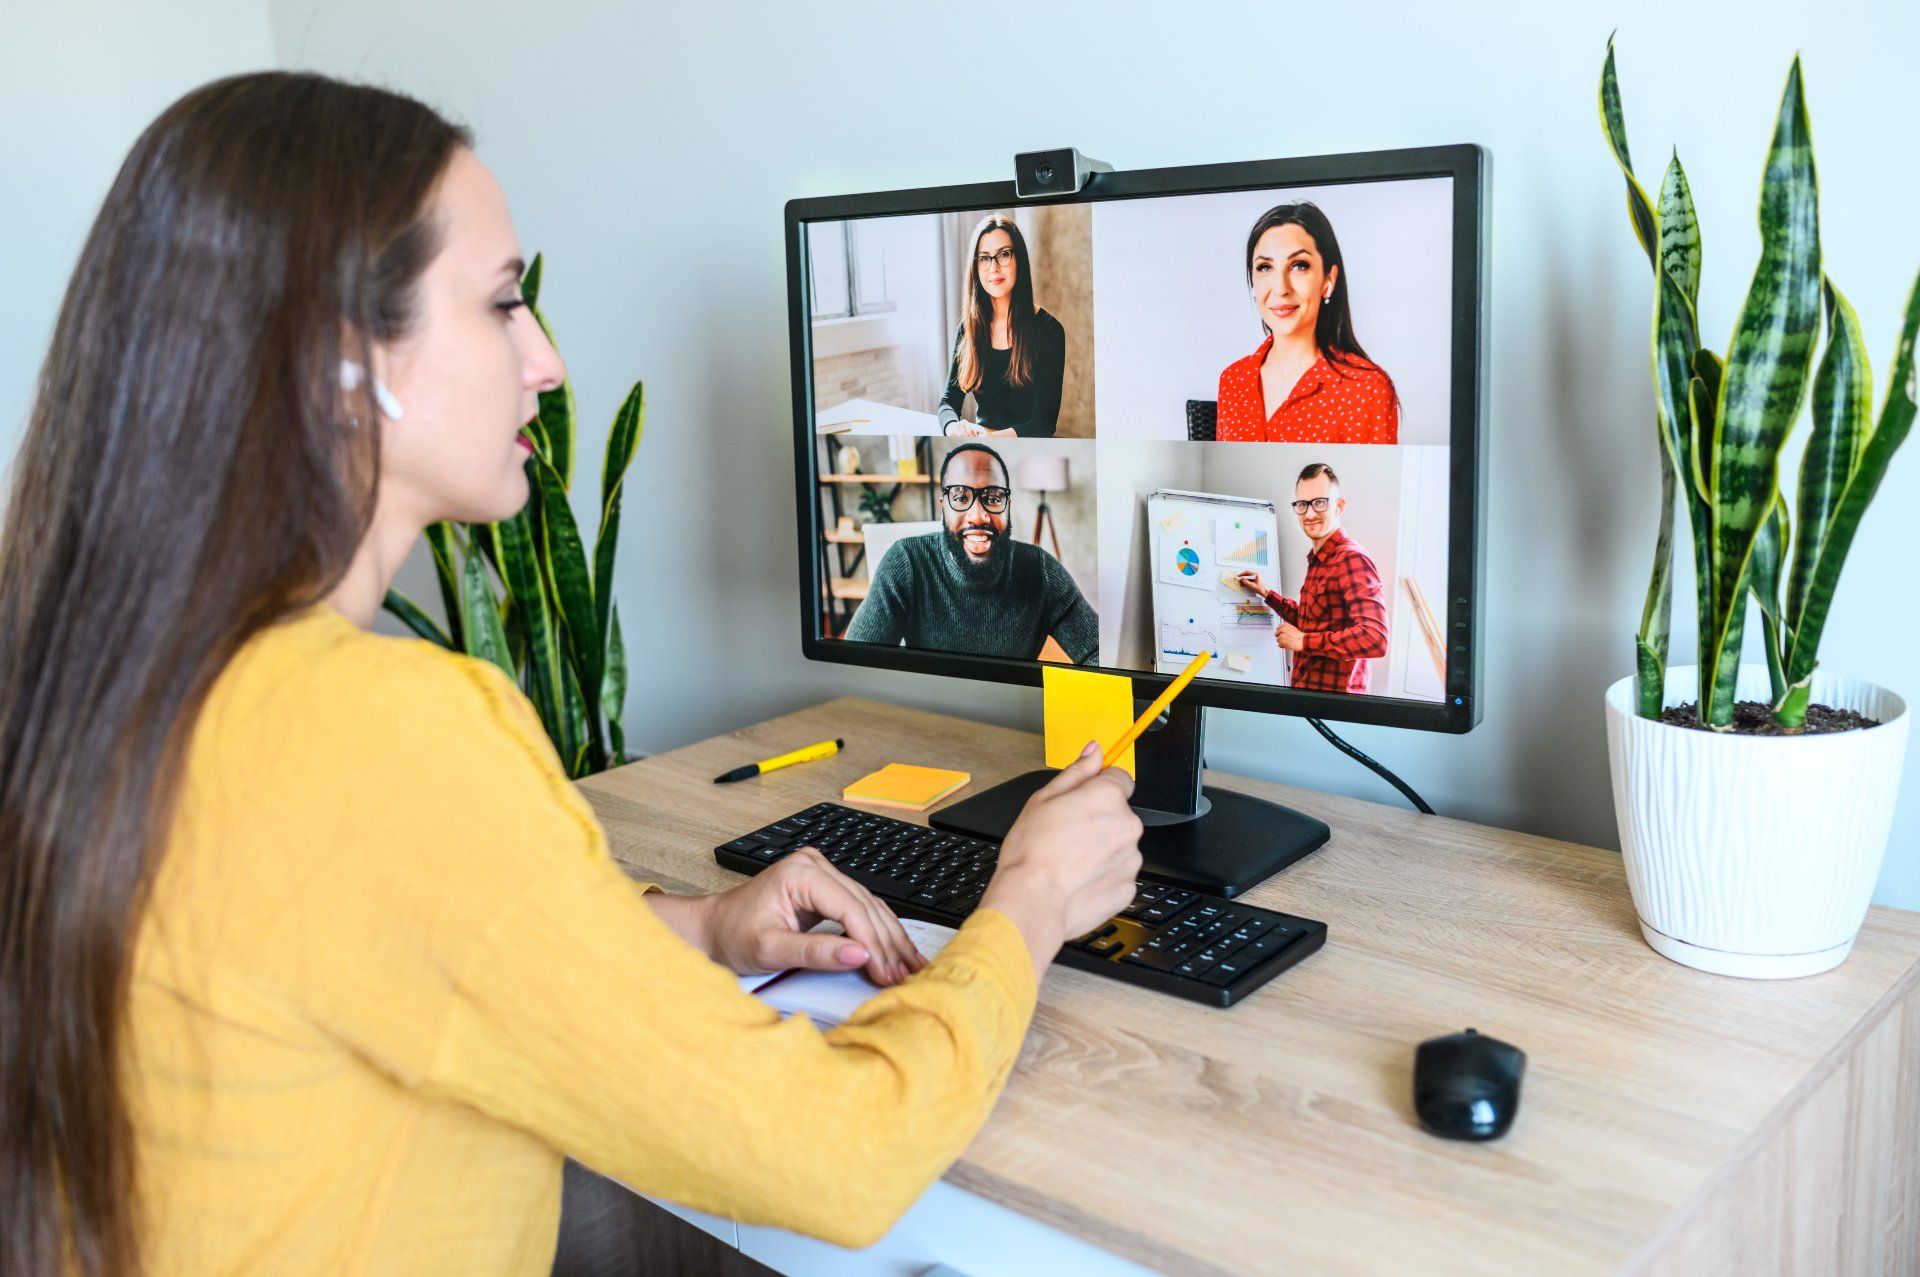 A woman in a yellow shirt participates in a video conference via computer - Zoom privacy